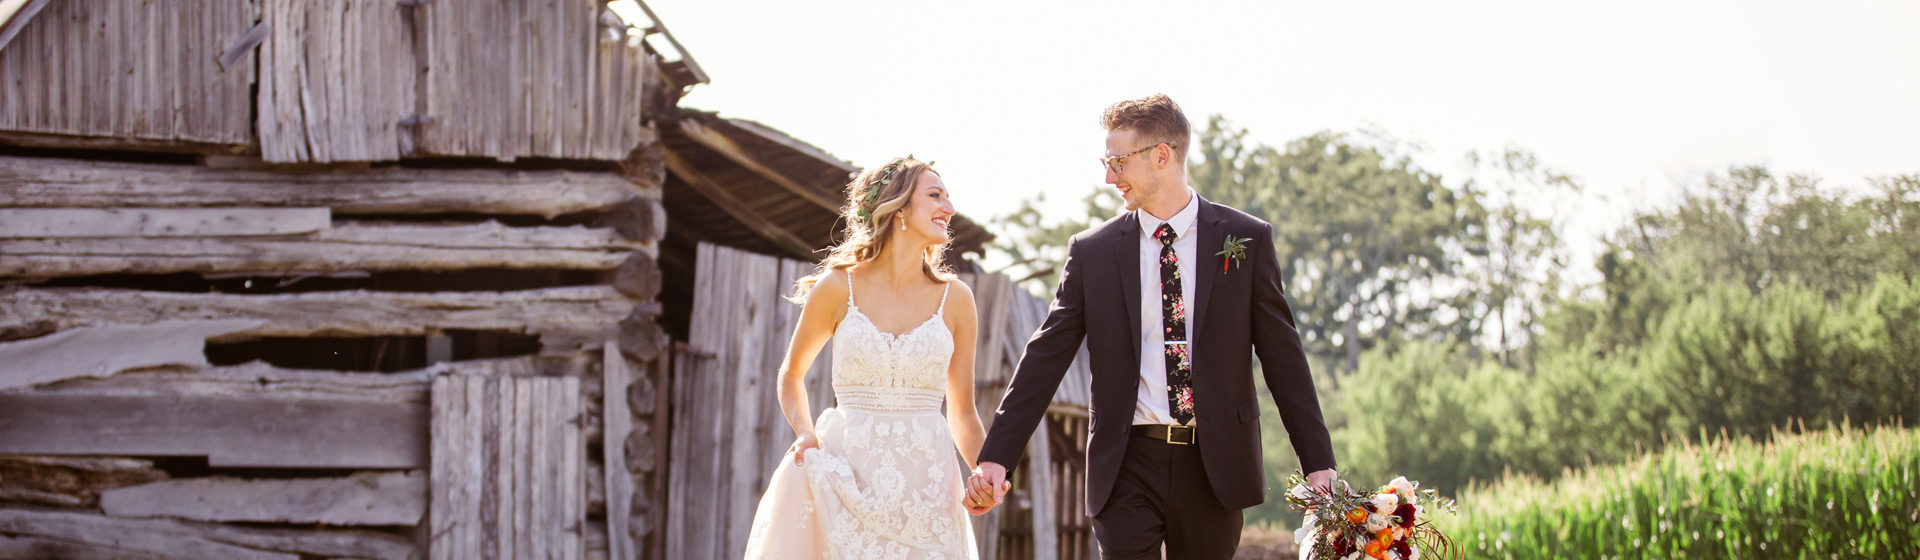 Bride and groom walking in front of an old log barn